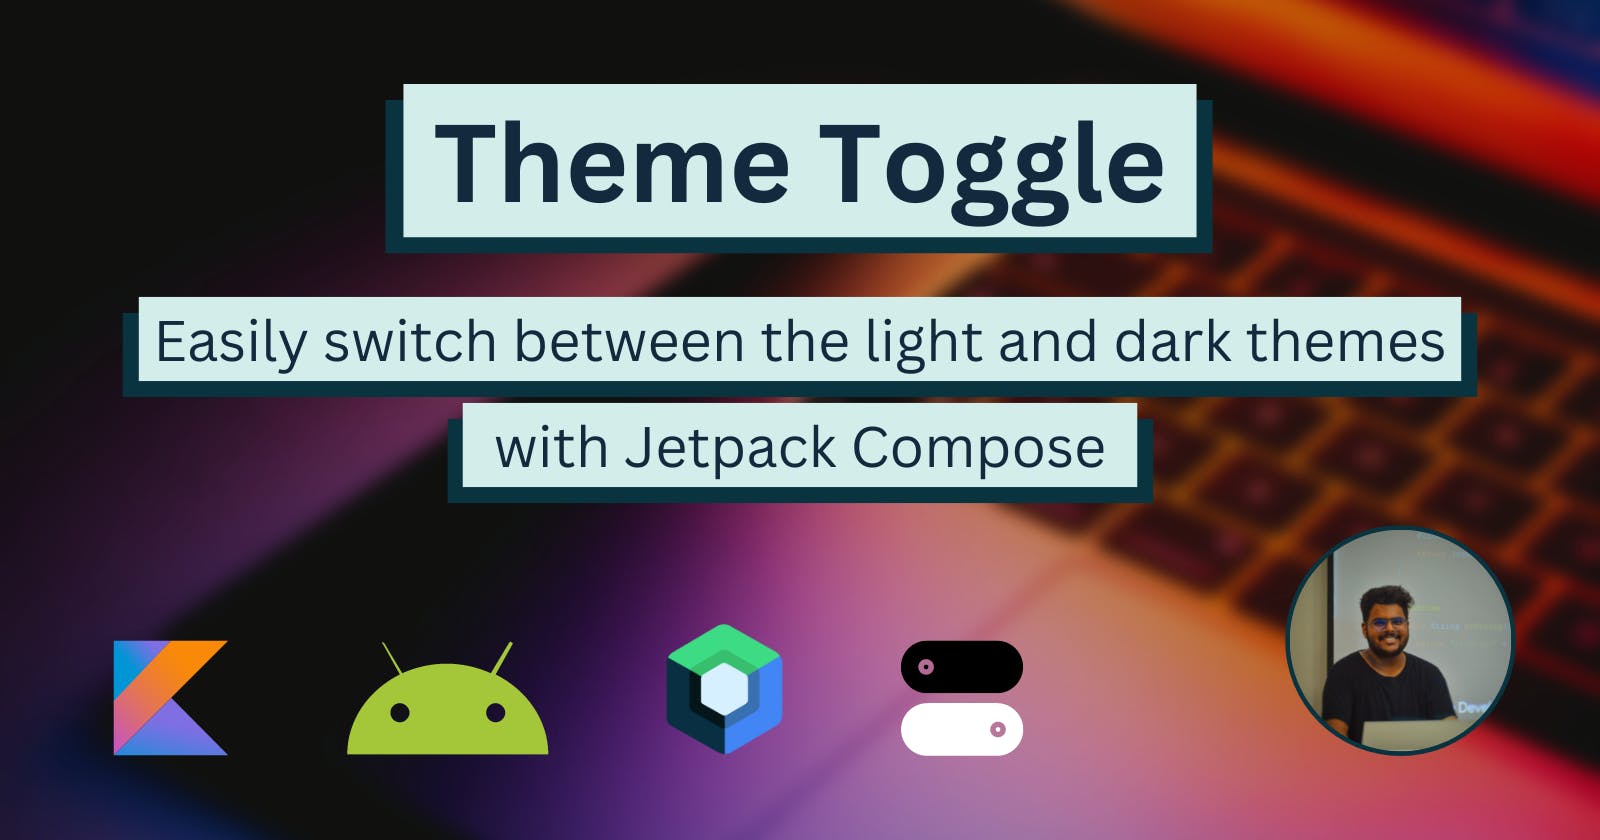 Build a Light/Dark Theme Toggle with Jetpack Compose in Android: A Step-by-Step Guide